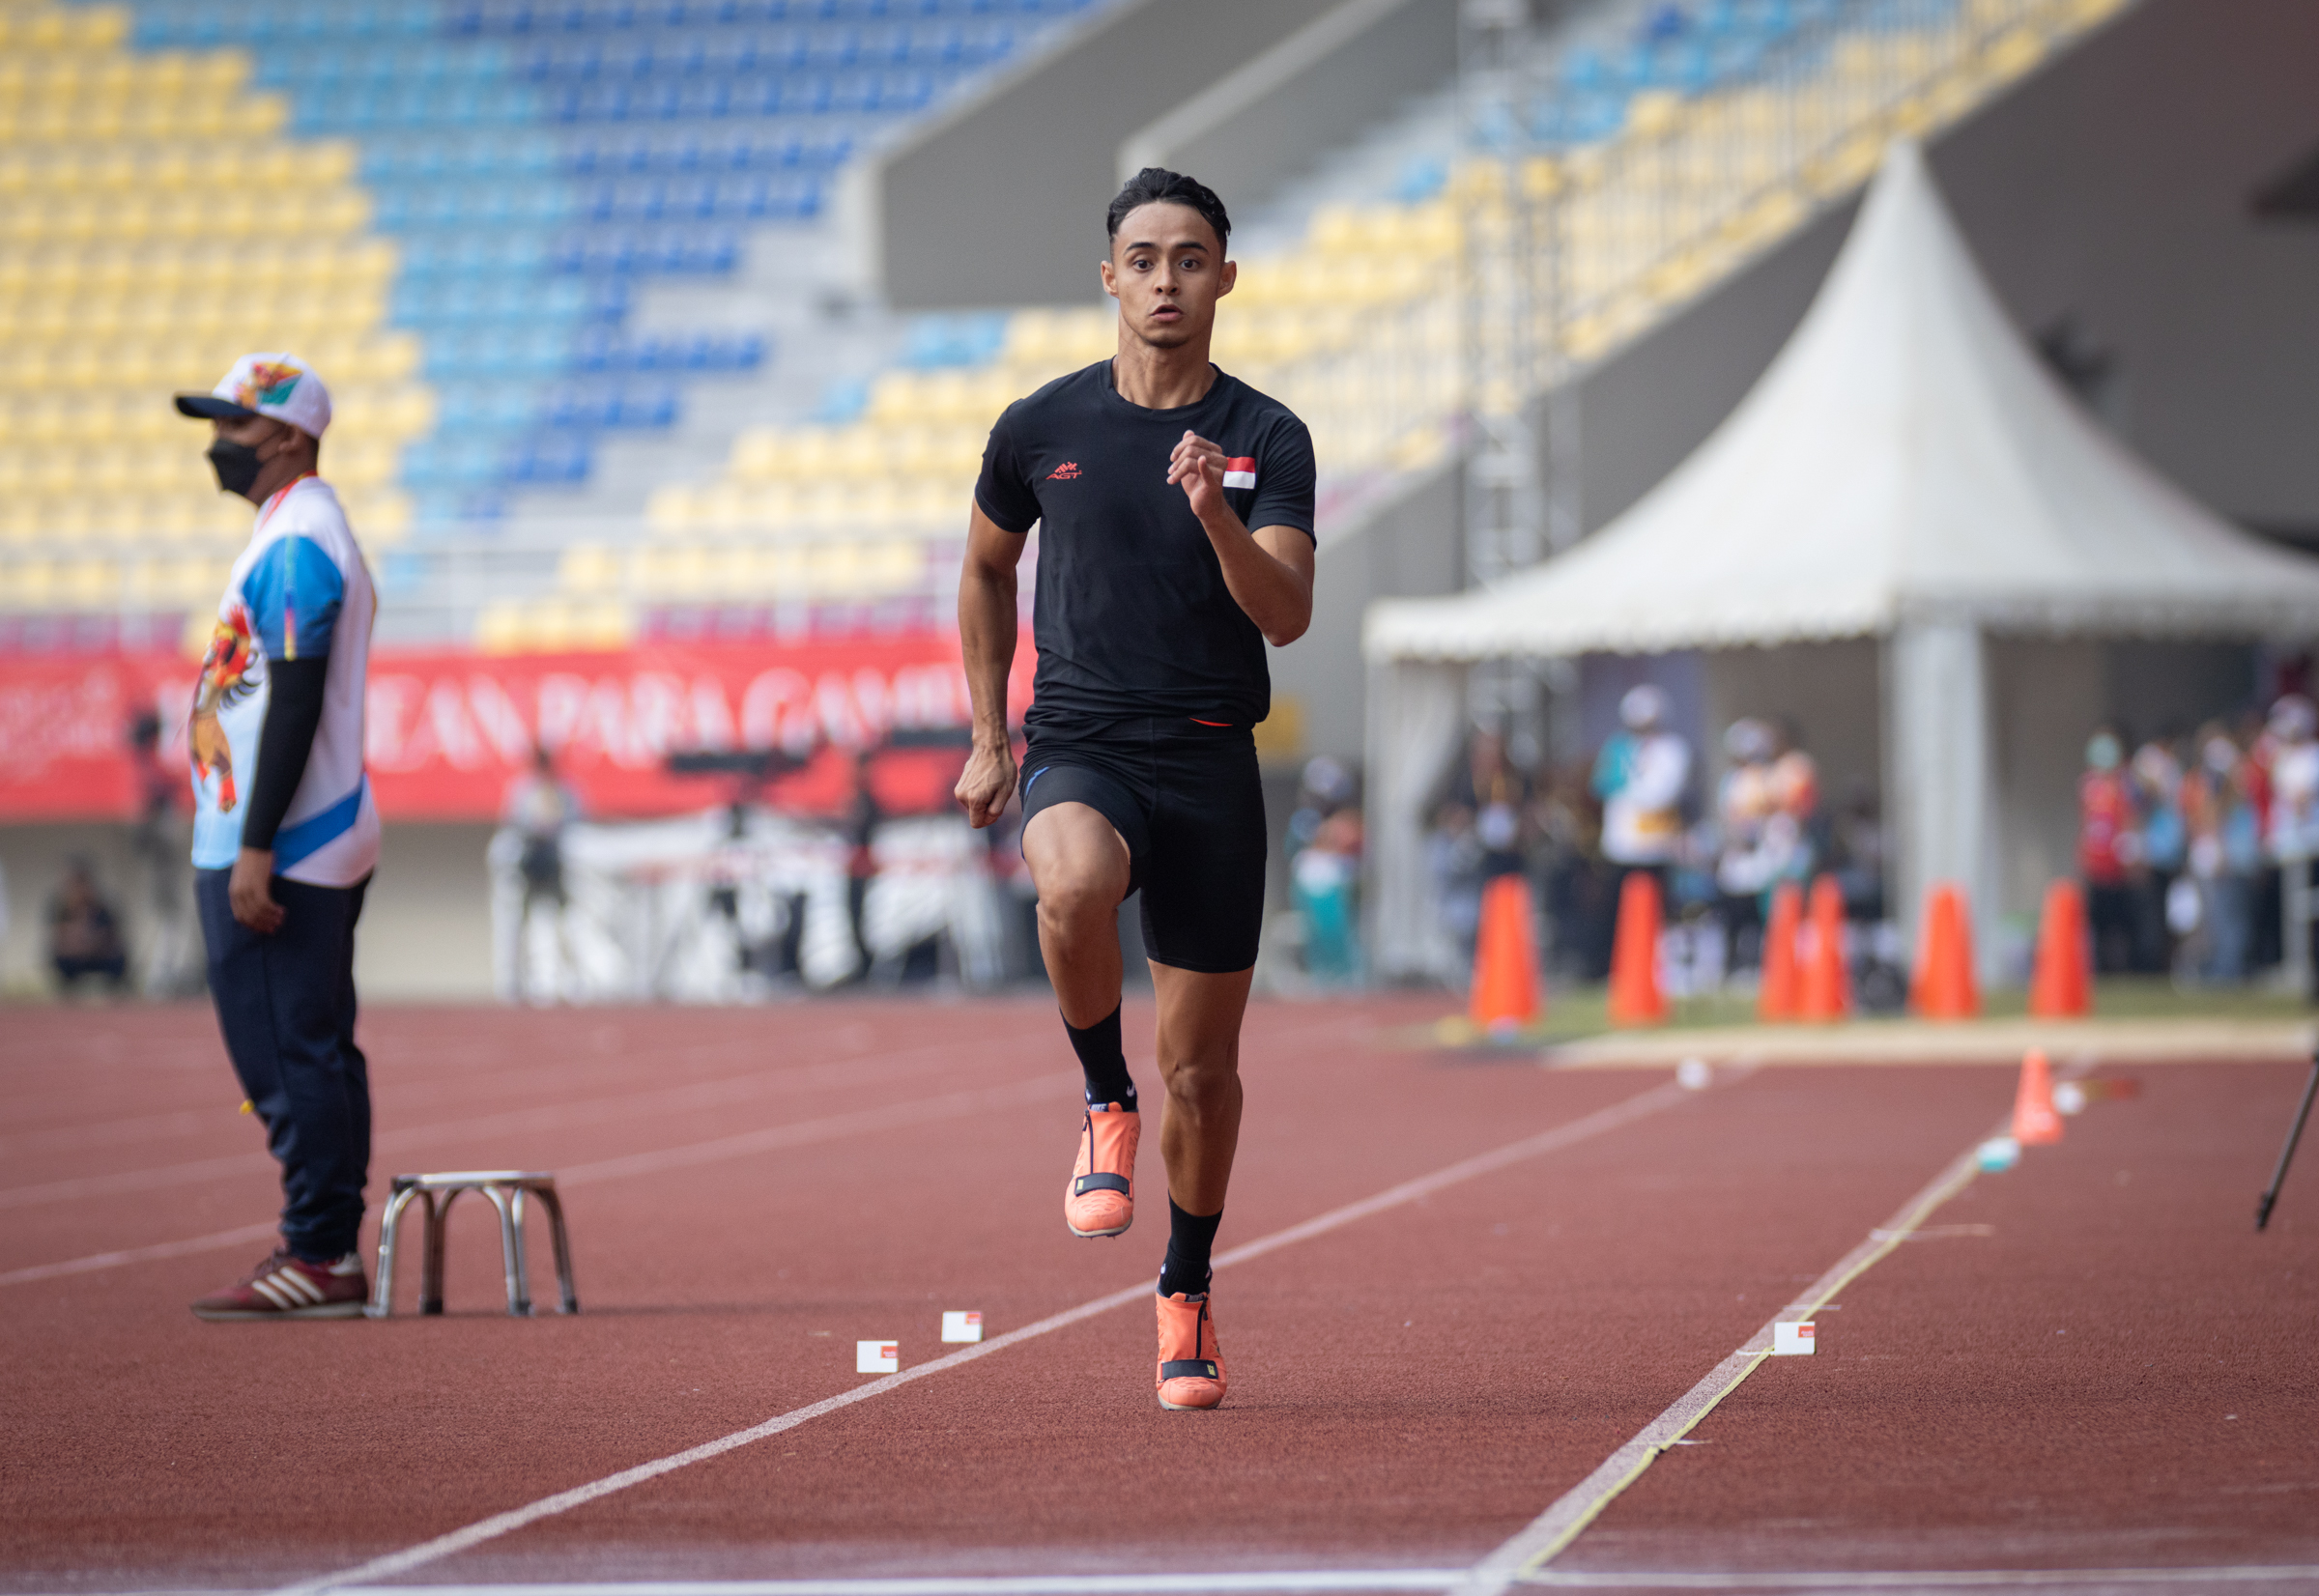 Cambodia 2023 APG : TeamSG's Suhairi bin Suhani is Aiming for Long Jump Gold Medal!